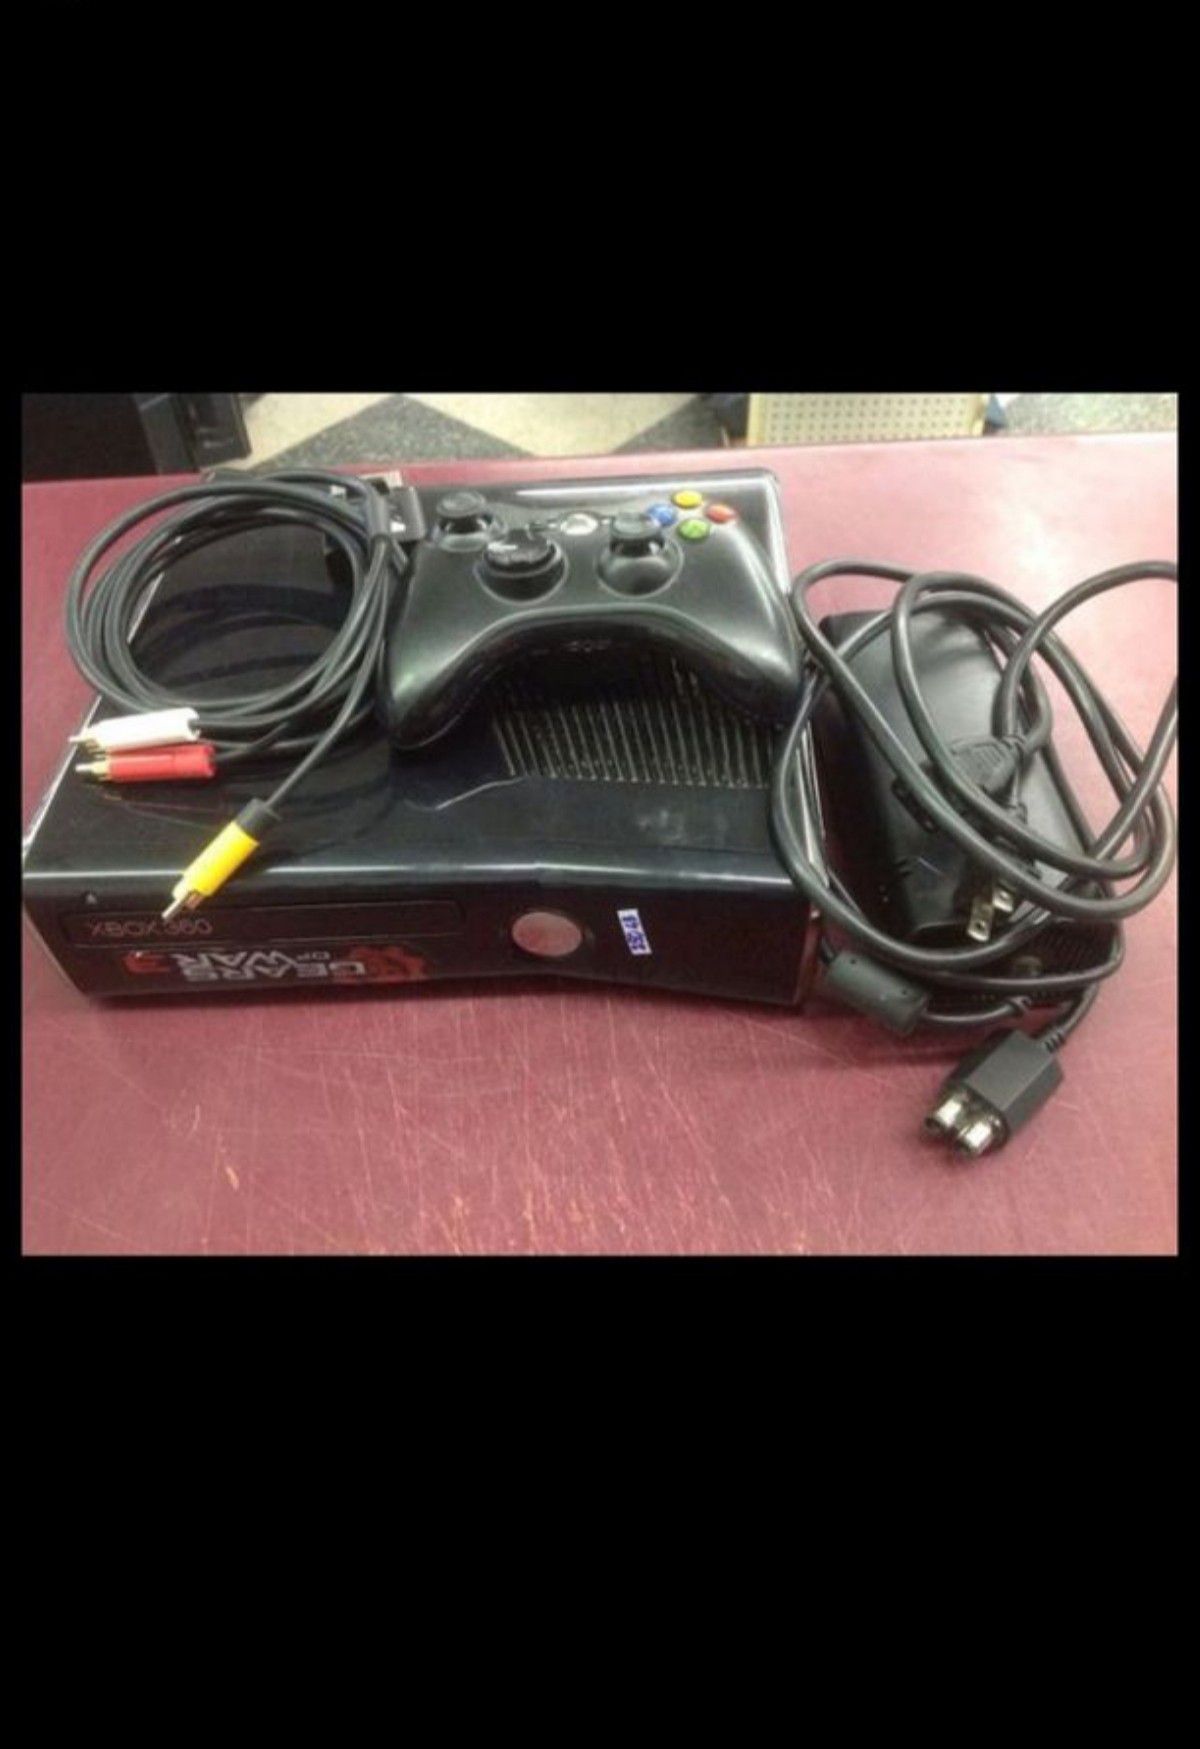 Xbox 360 game system - price is firm